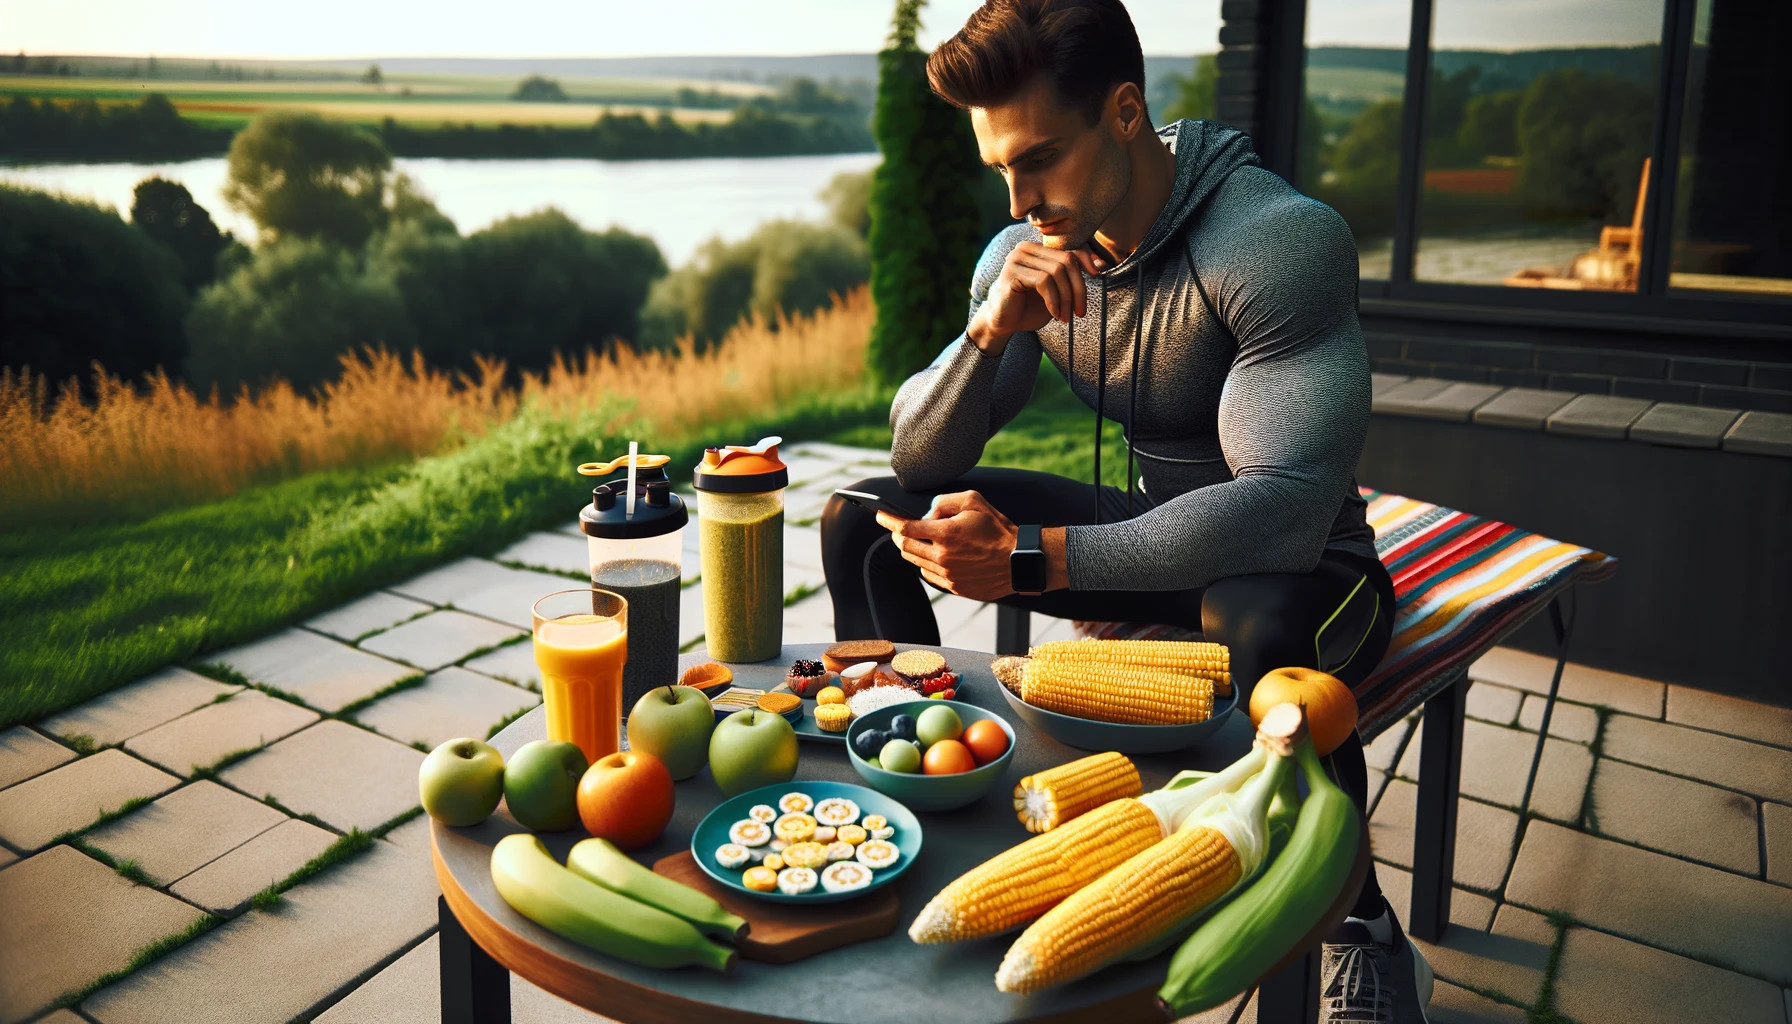 A person after a workout session, choosing corn as a healthy post-exercise meal in an outdoor setting.